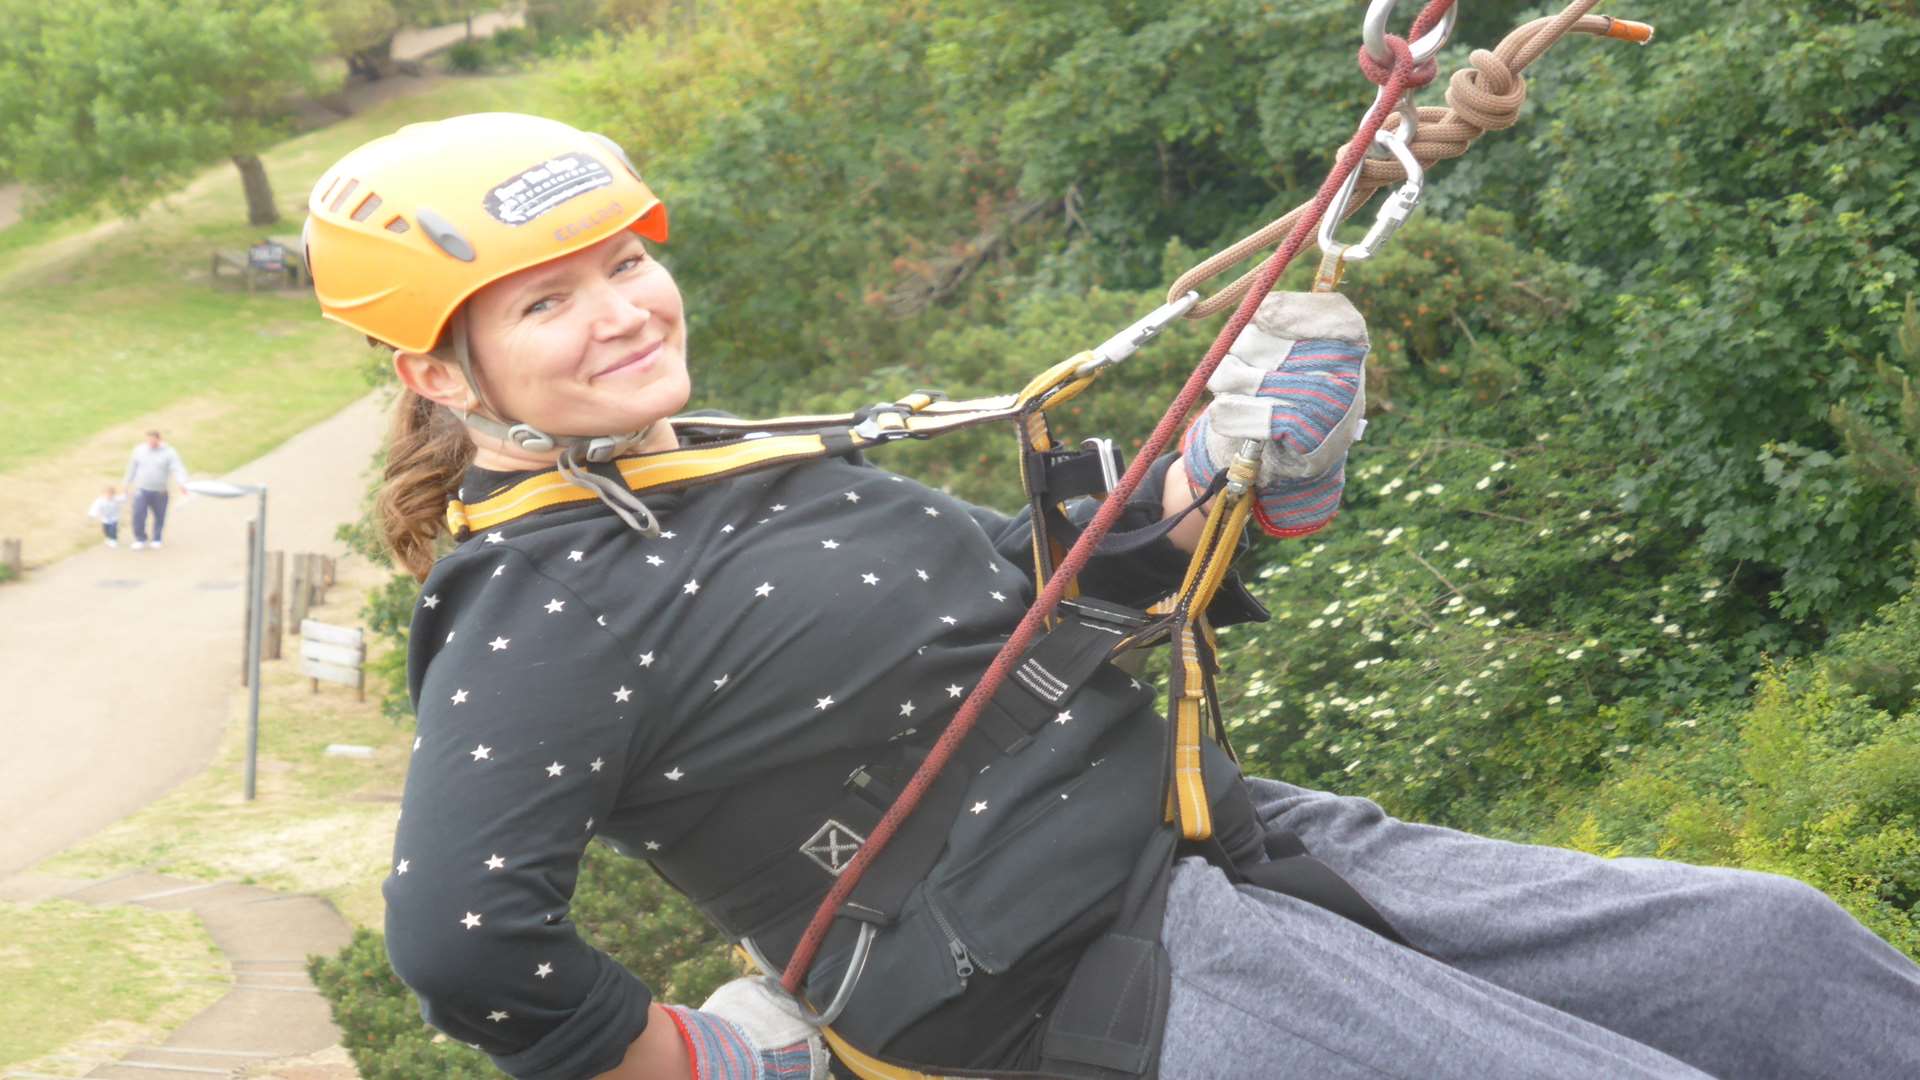 Actress Jessica Hynes took part in the KM abseil at Leas Cliff Hall, Folkestone for Action for Children.